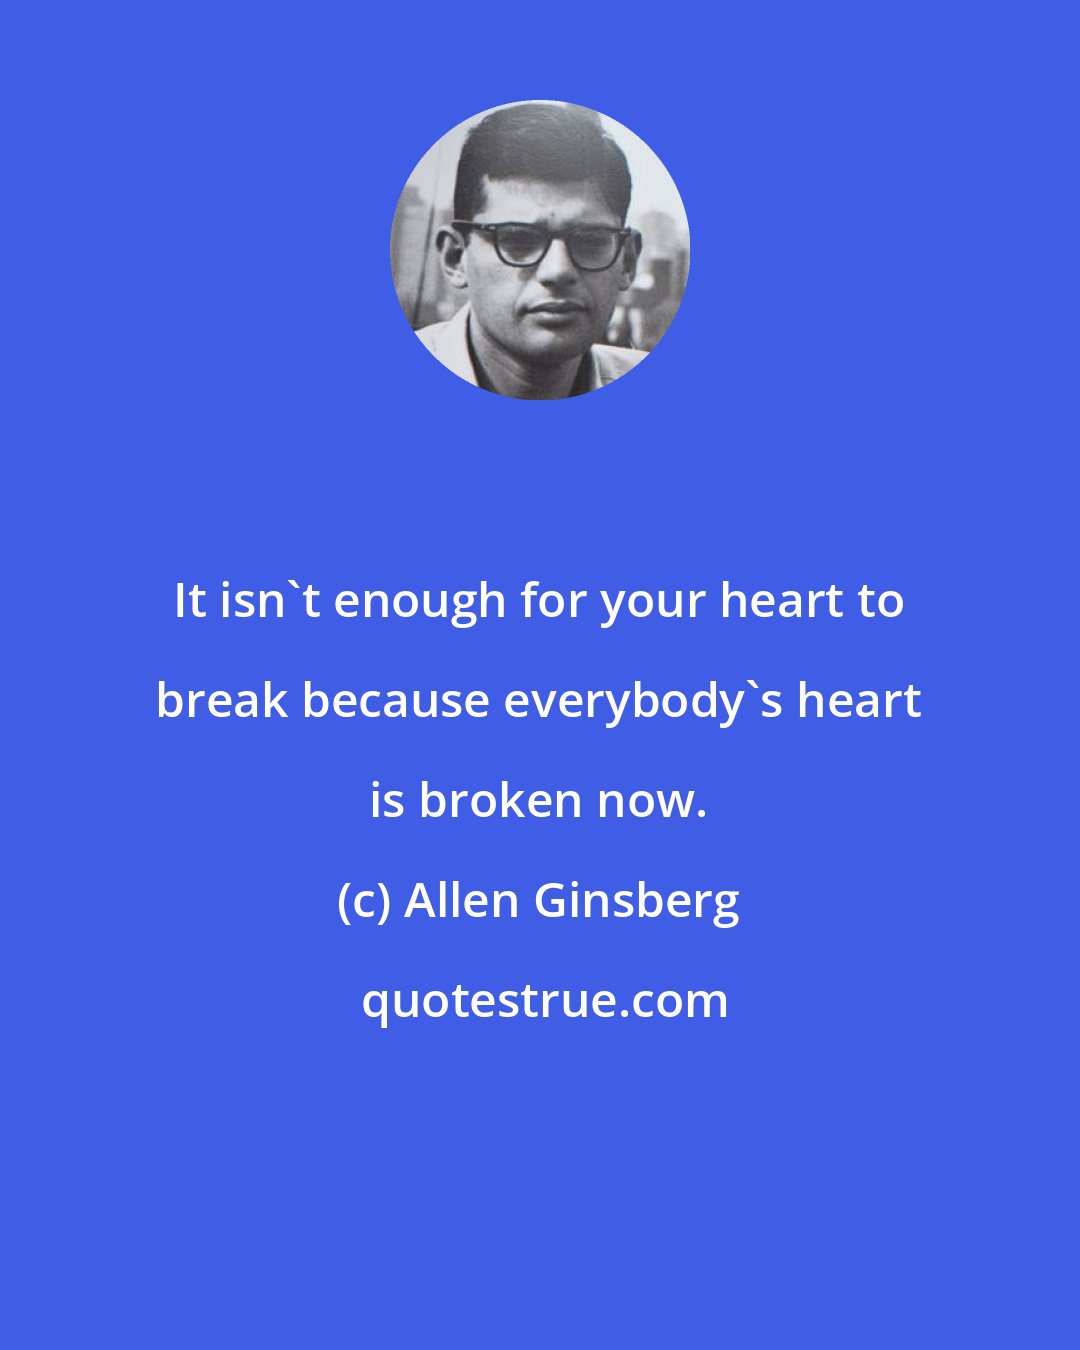 Allen Ginsberg: It isn't enough for your heart to break because everybody's heart is broken now.